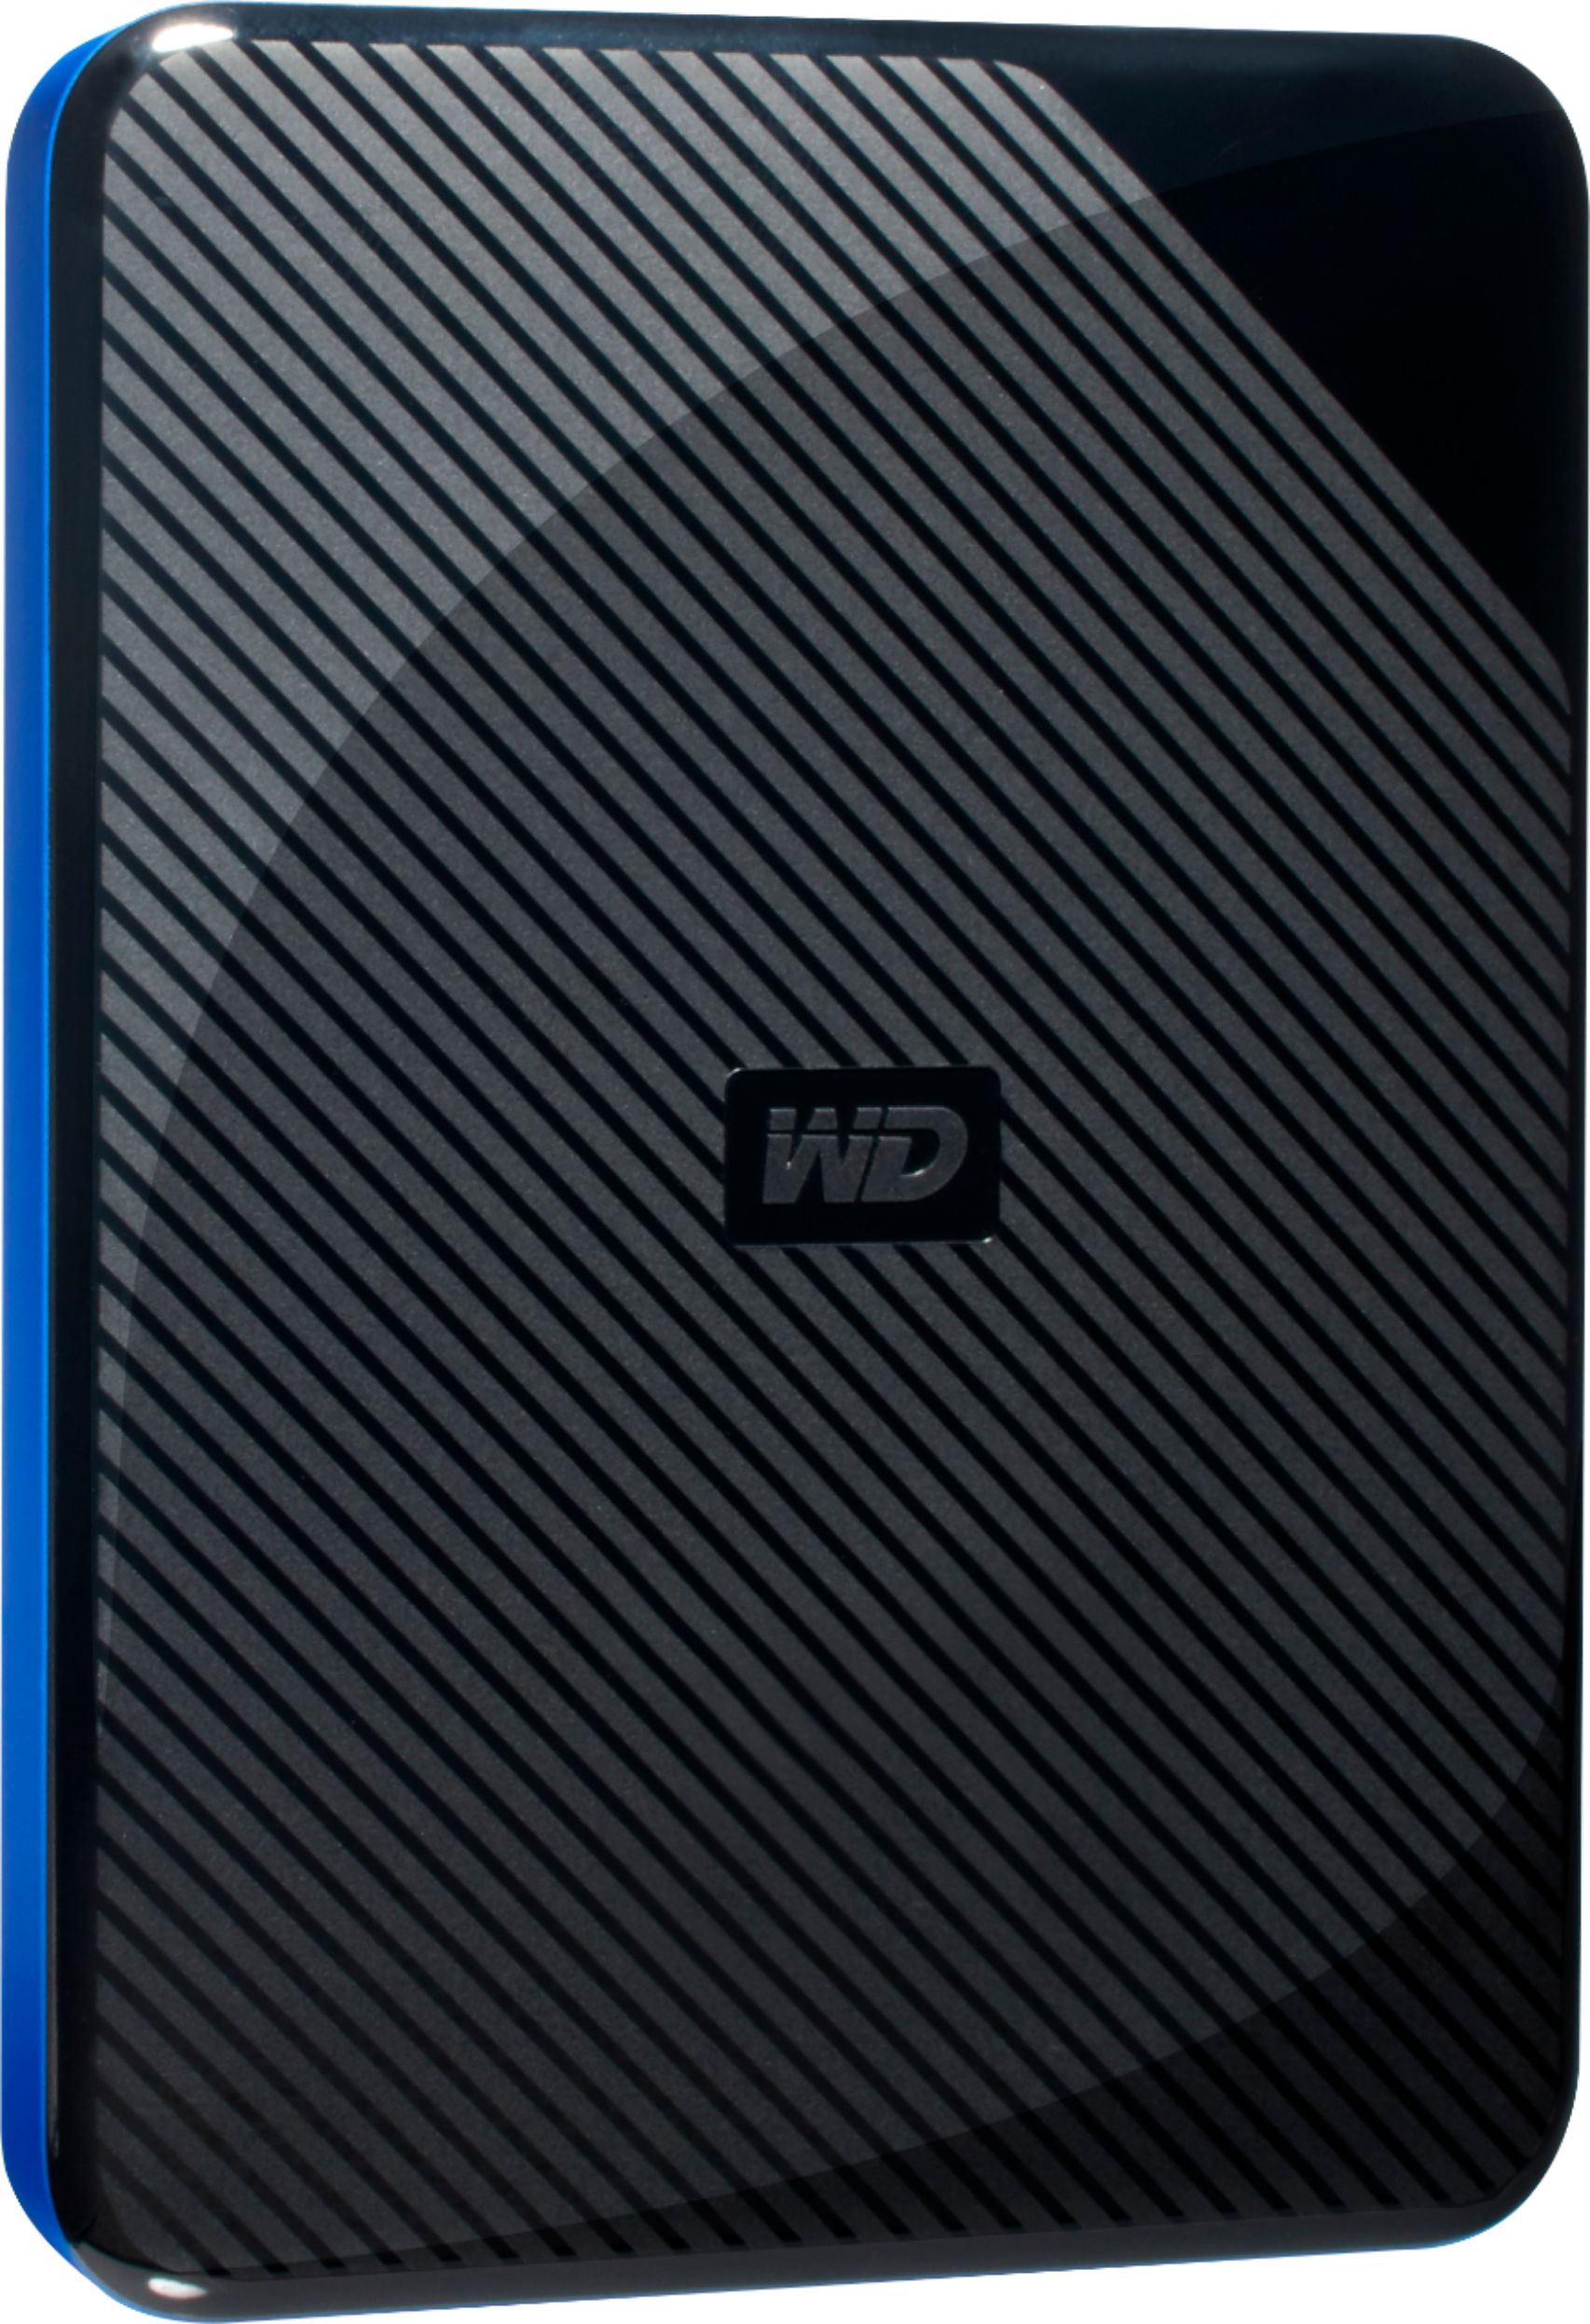 WD Game Drive for PS4 2TB USB 3.0 Portable Hard Drive Black/Blue WDBDFF0020BBK-WESN - Best Buy